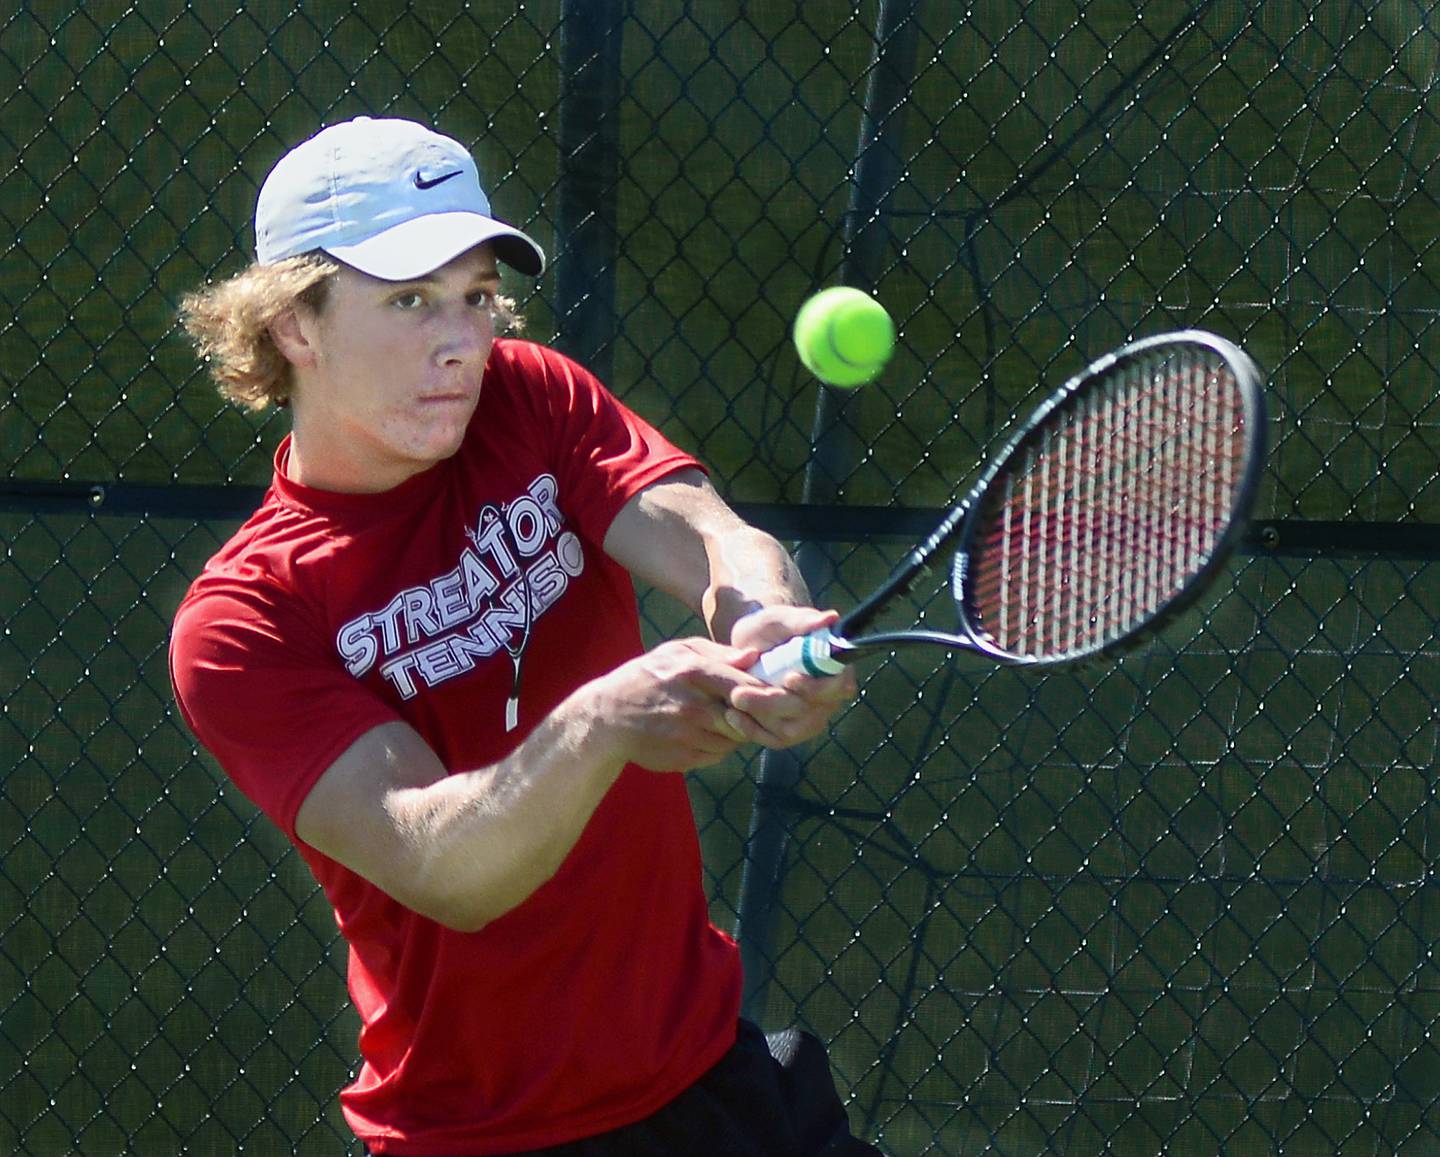 Streator singles standout Davey Rashid hits a backhand against Metamora's Alexander Schroff during the 2021 Ottawa Class 1A Sectional finals at Ottawa's King Field courts.